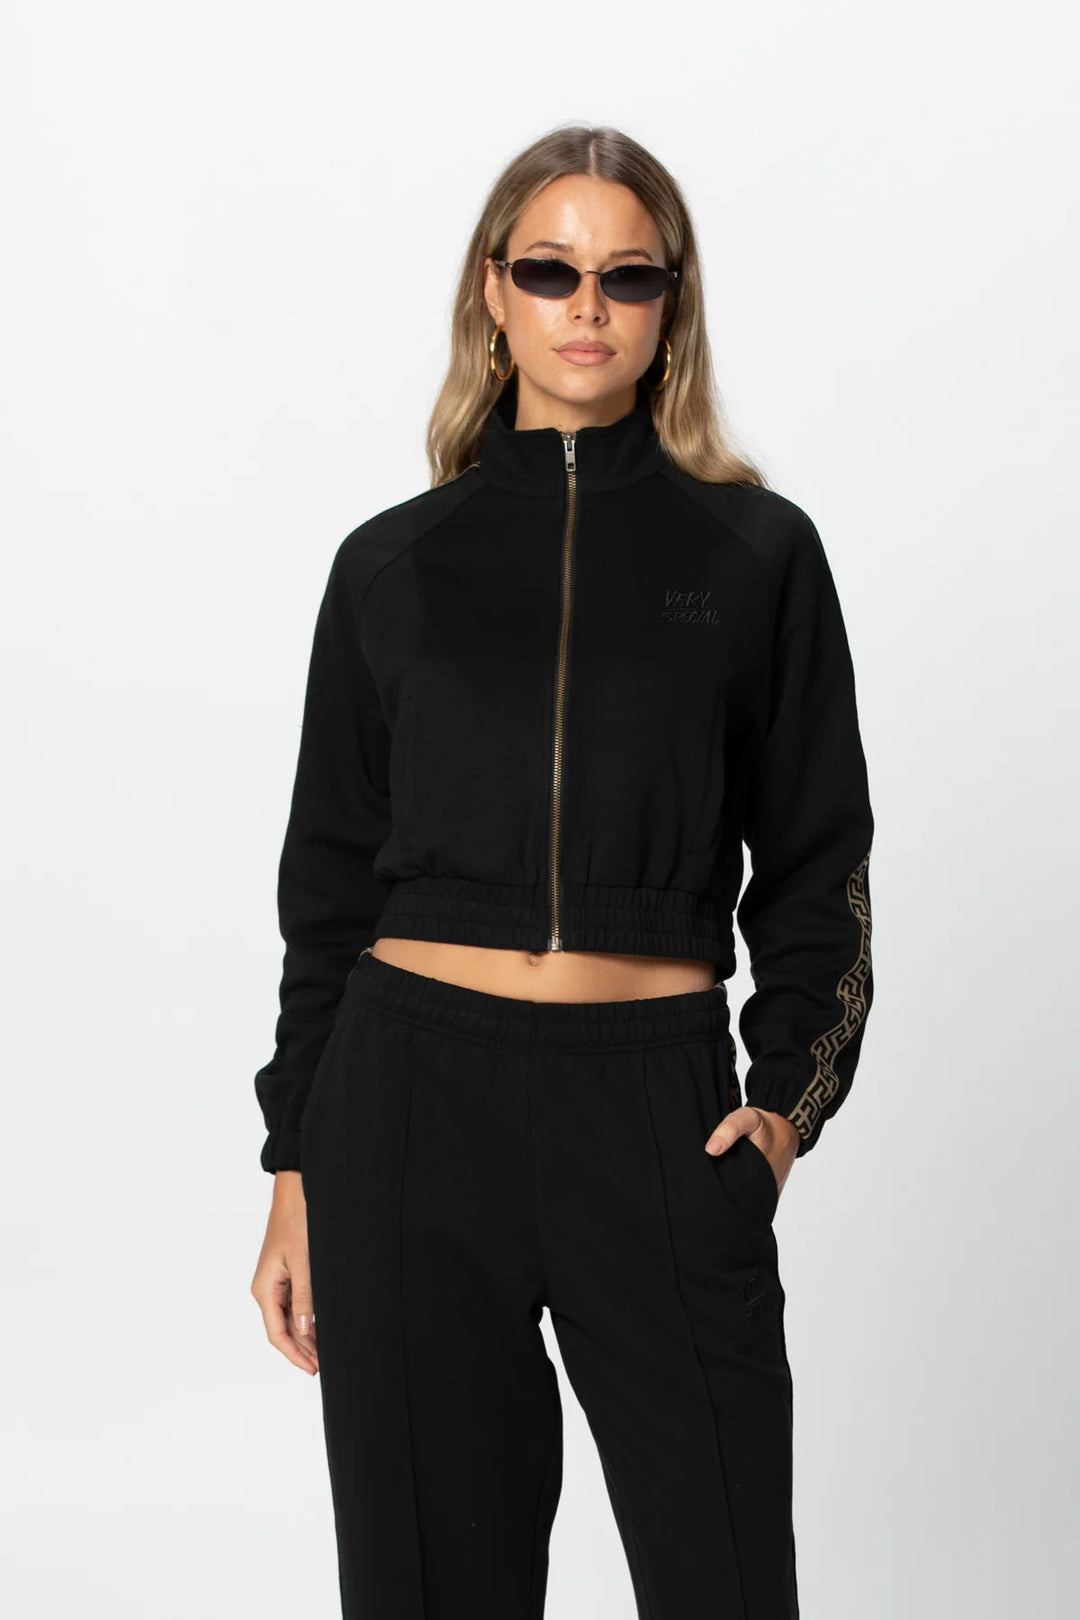 Something Very Special - Geo Track Jacket - Black Gold